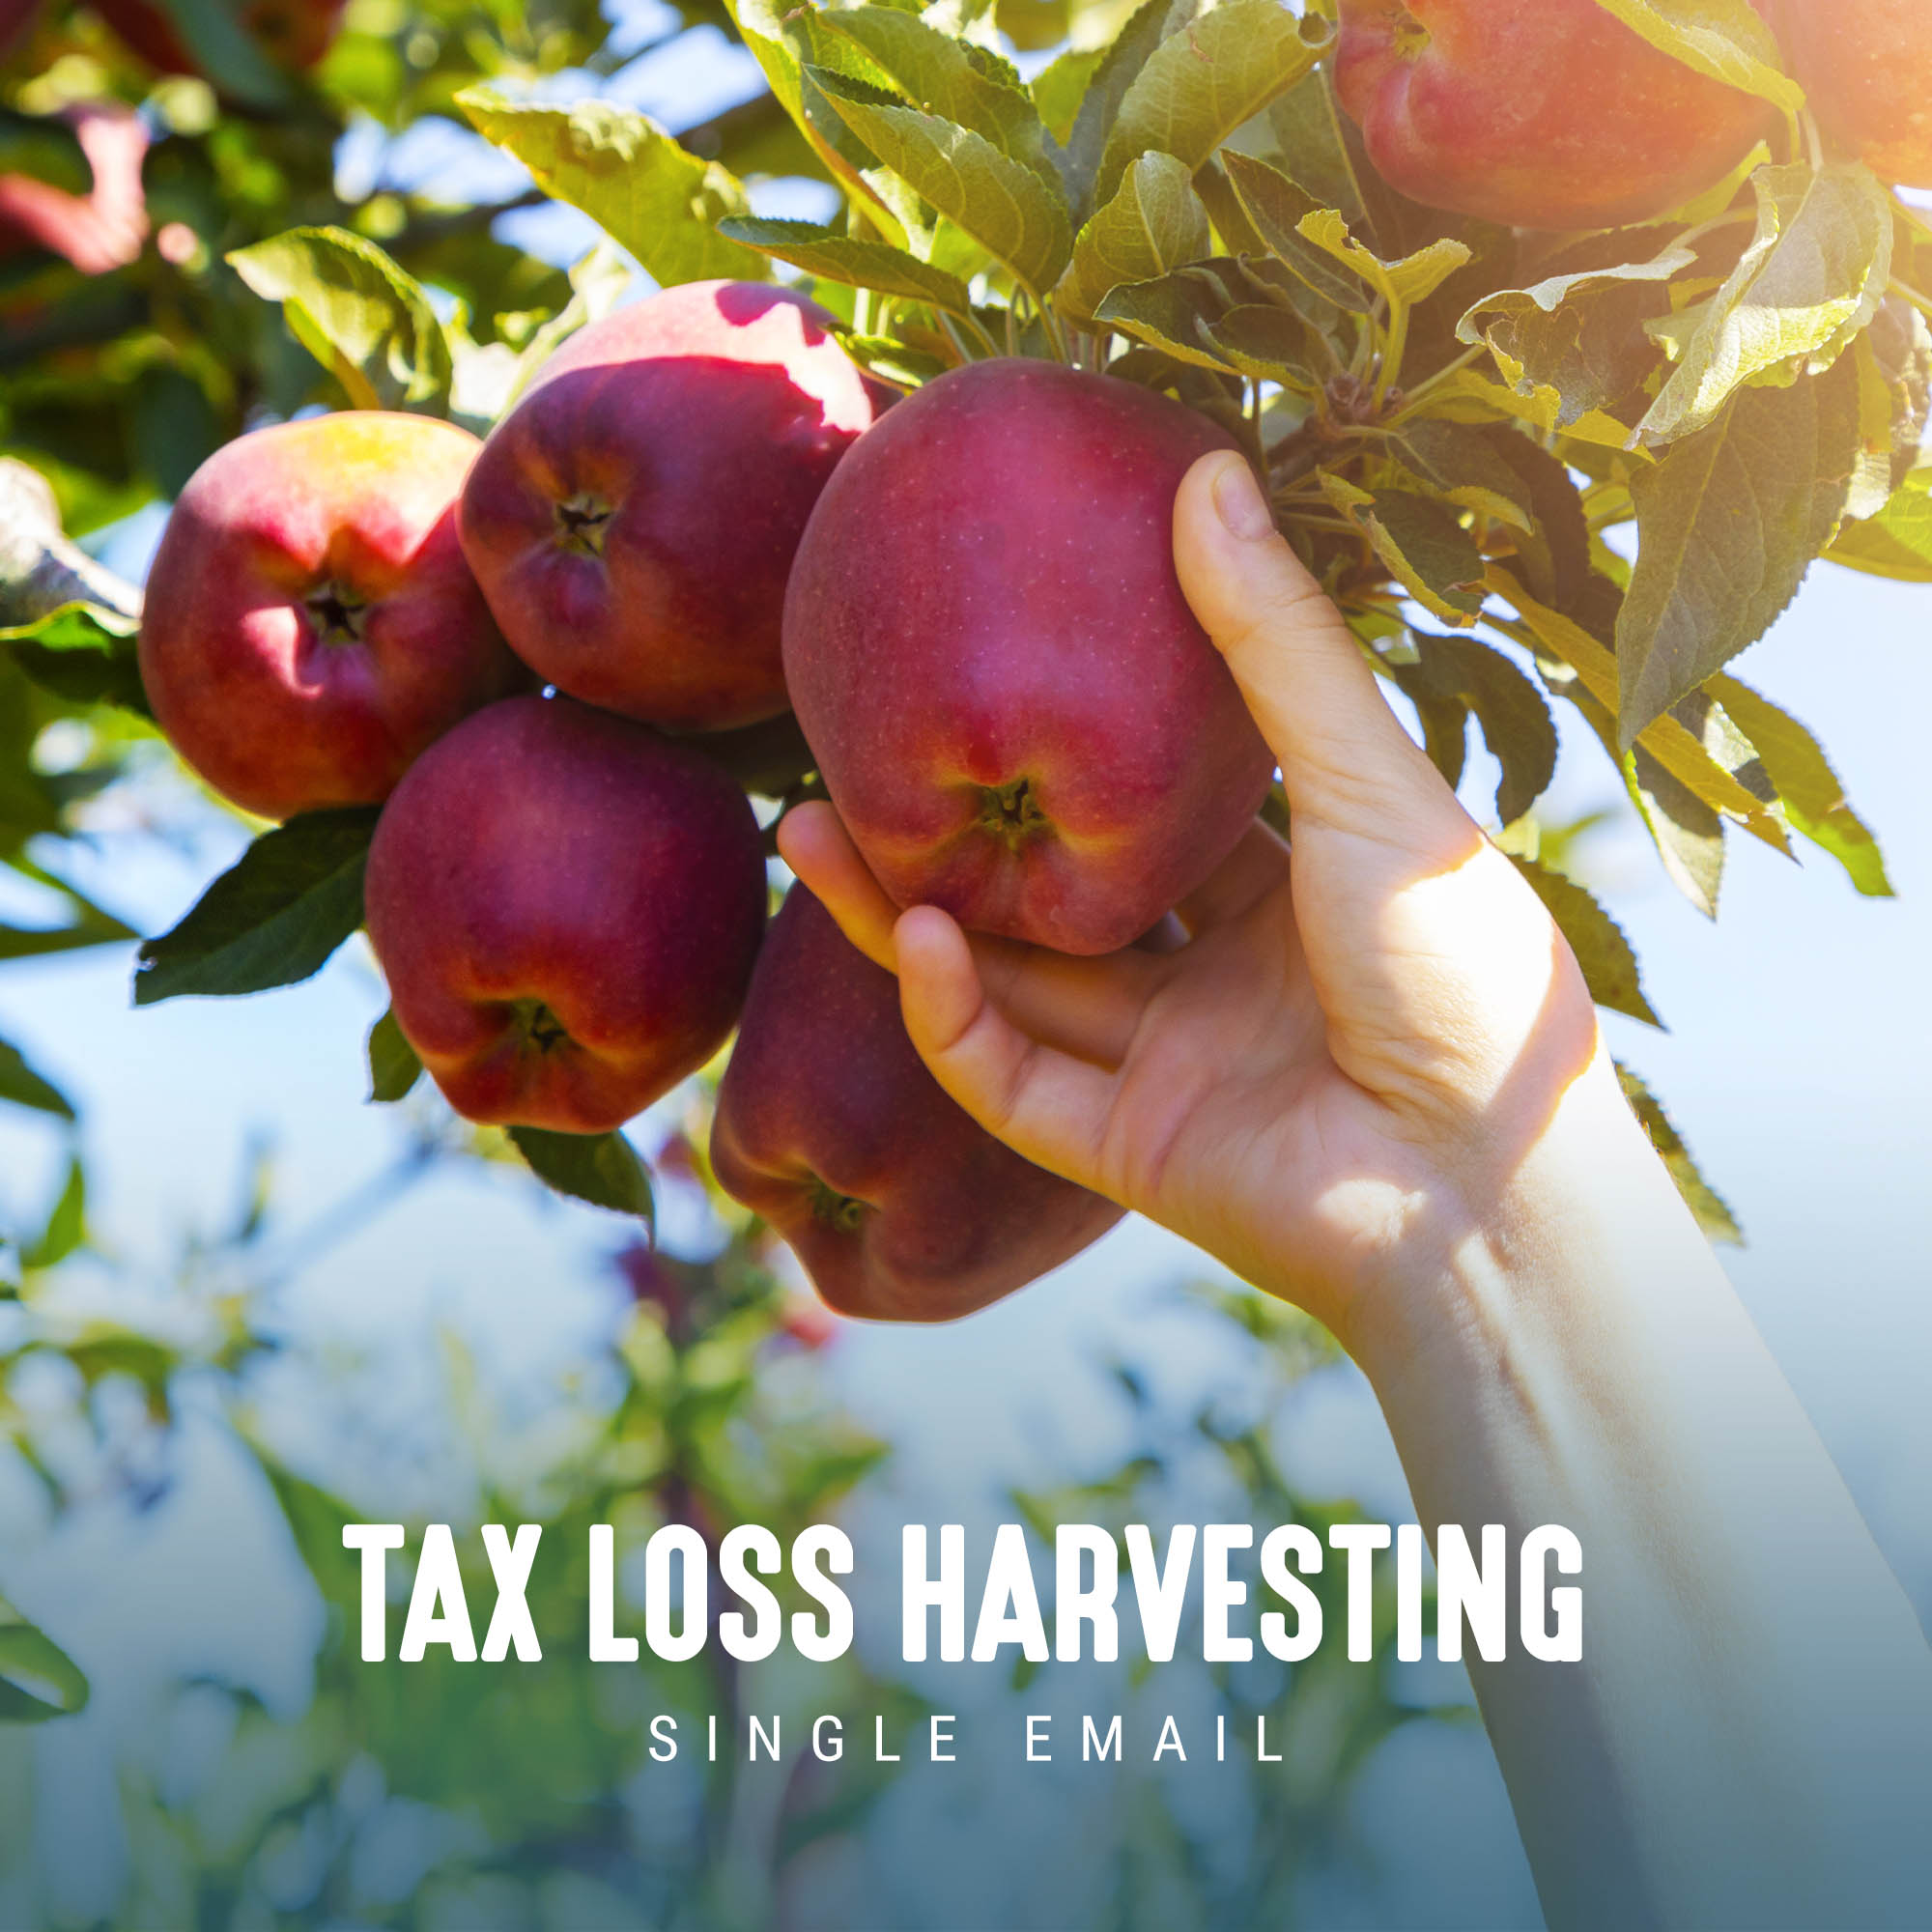 [NEW] Tax-Loss Harvesting Email Campaign For Financial Advisors